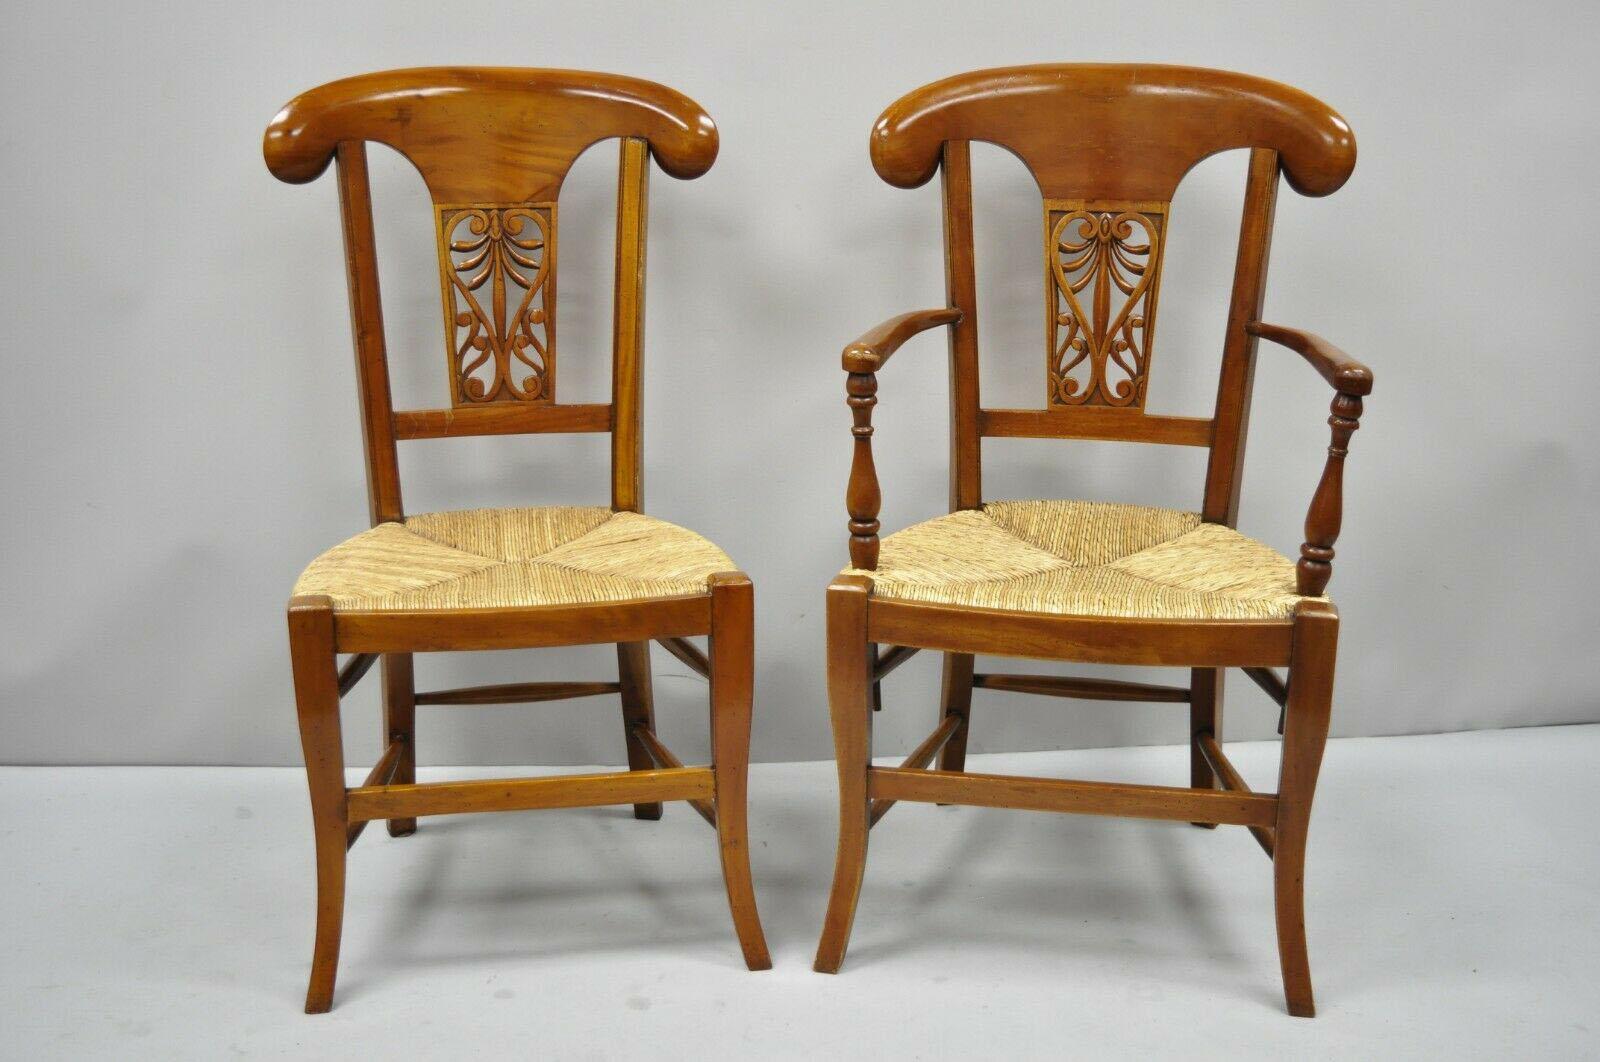 Set of 4 country French Provincial carved cherrywood rush seat dining chairs. Items feature woven rush seat, loose cushion, solid wood construction, distressed finish, nicely carved details, great style and form, circa late 20th century. Measures: